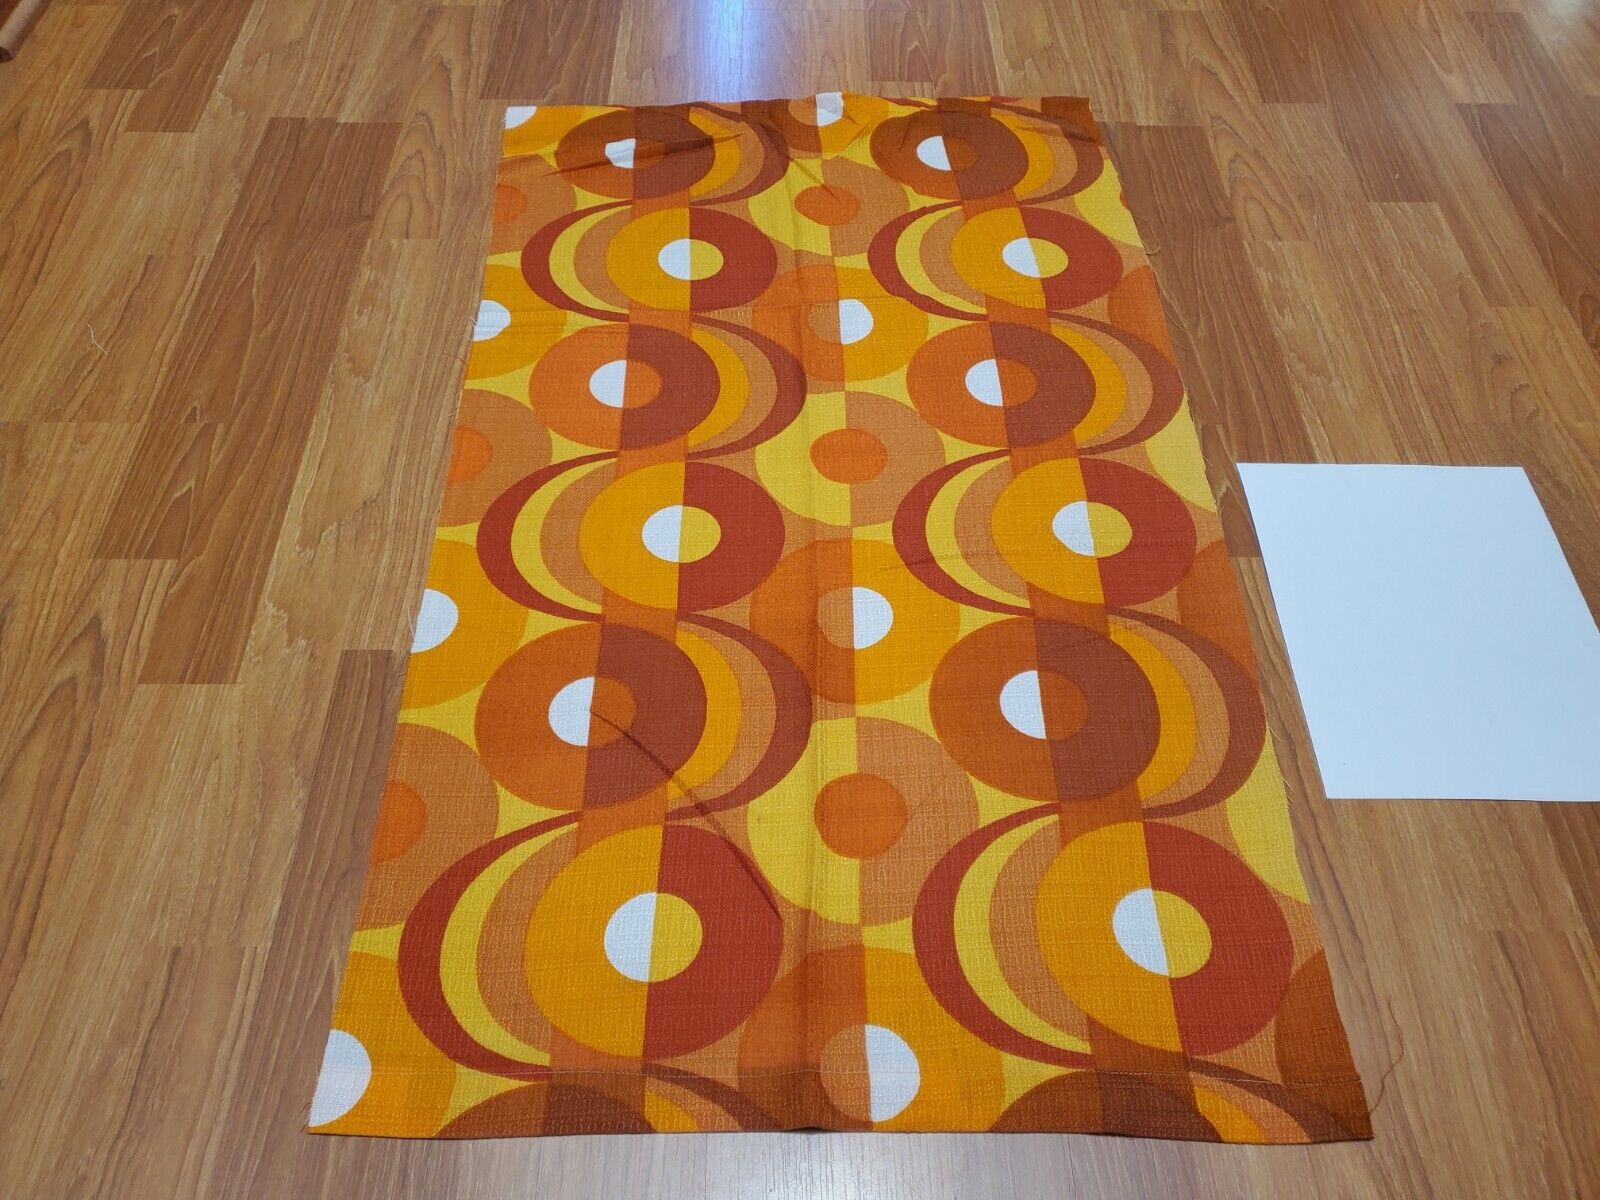 Awesome RARE Vintage Mid Century Retro 70s 60s Yel Org Circle Drop Waves Fabric